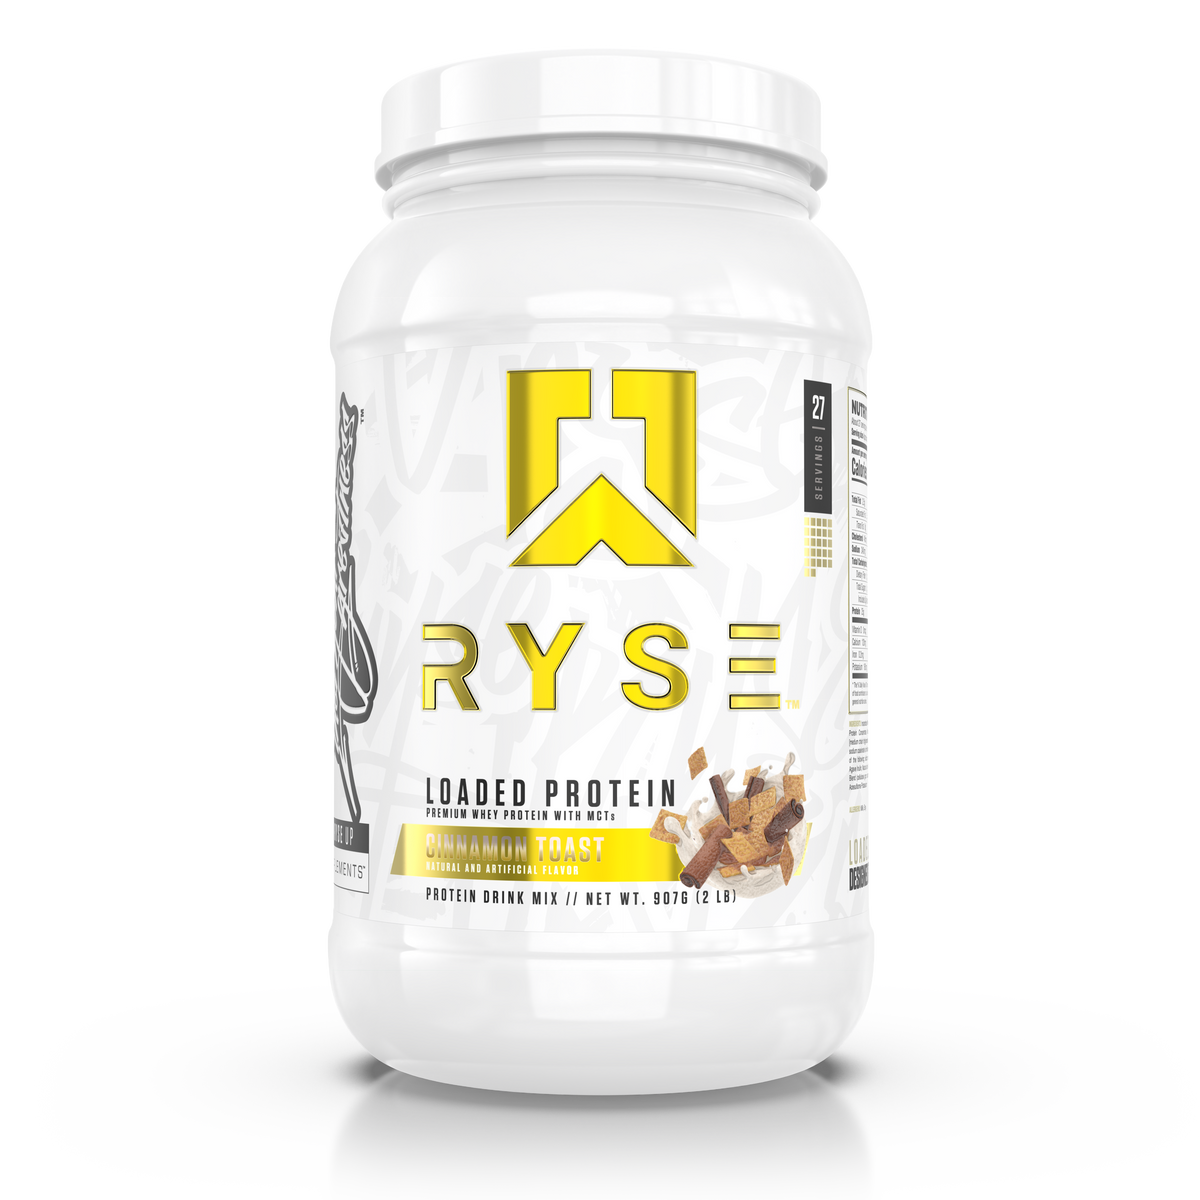 Ryse Loaded Protein Powder | 25g Whey Protein Isolate & Concentrate | with  Prebiotic Fiber & MCTs | Low Carbs & Low Sugar | 27 Servings (Skippy Peanut